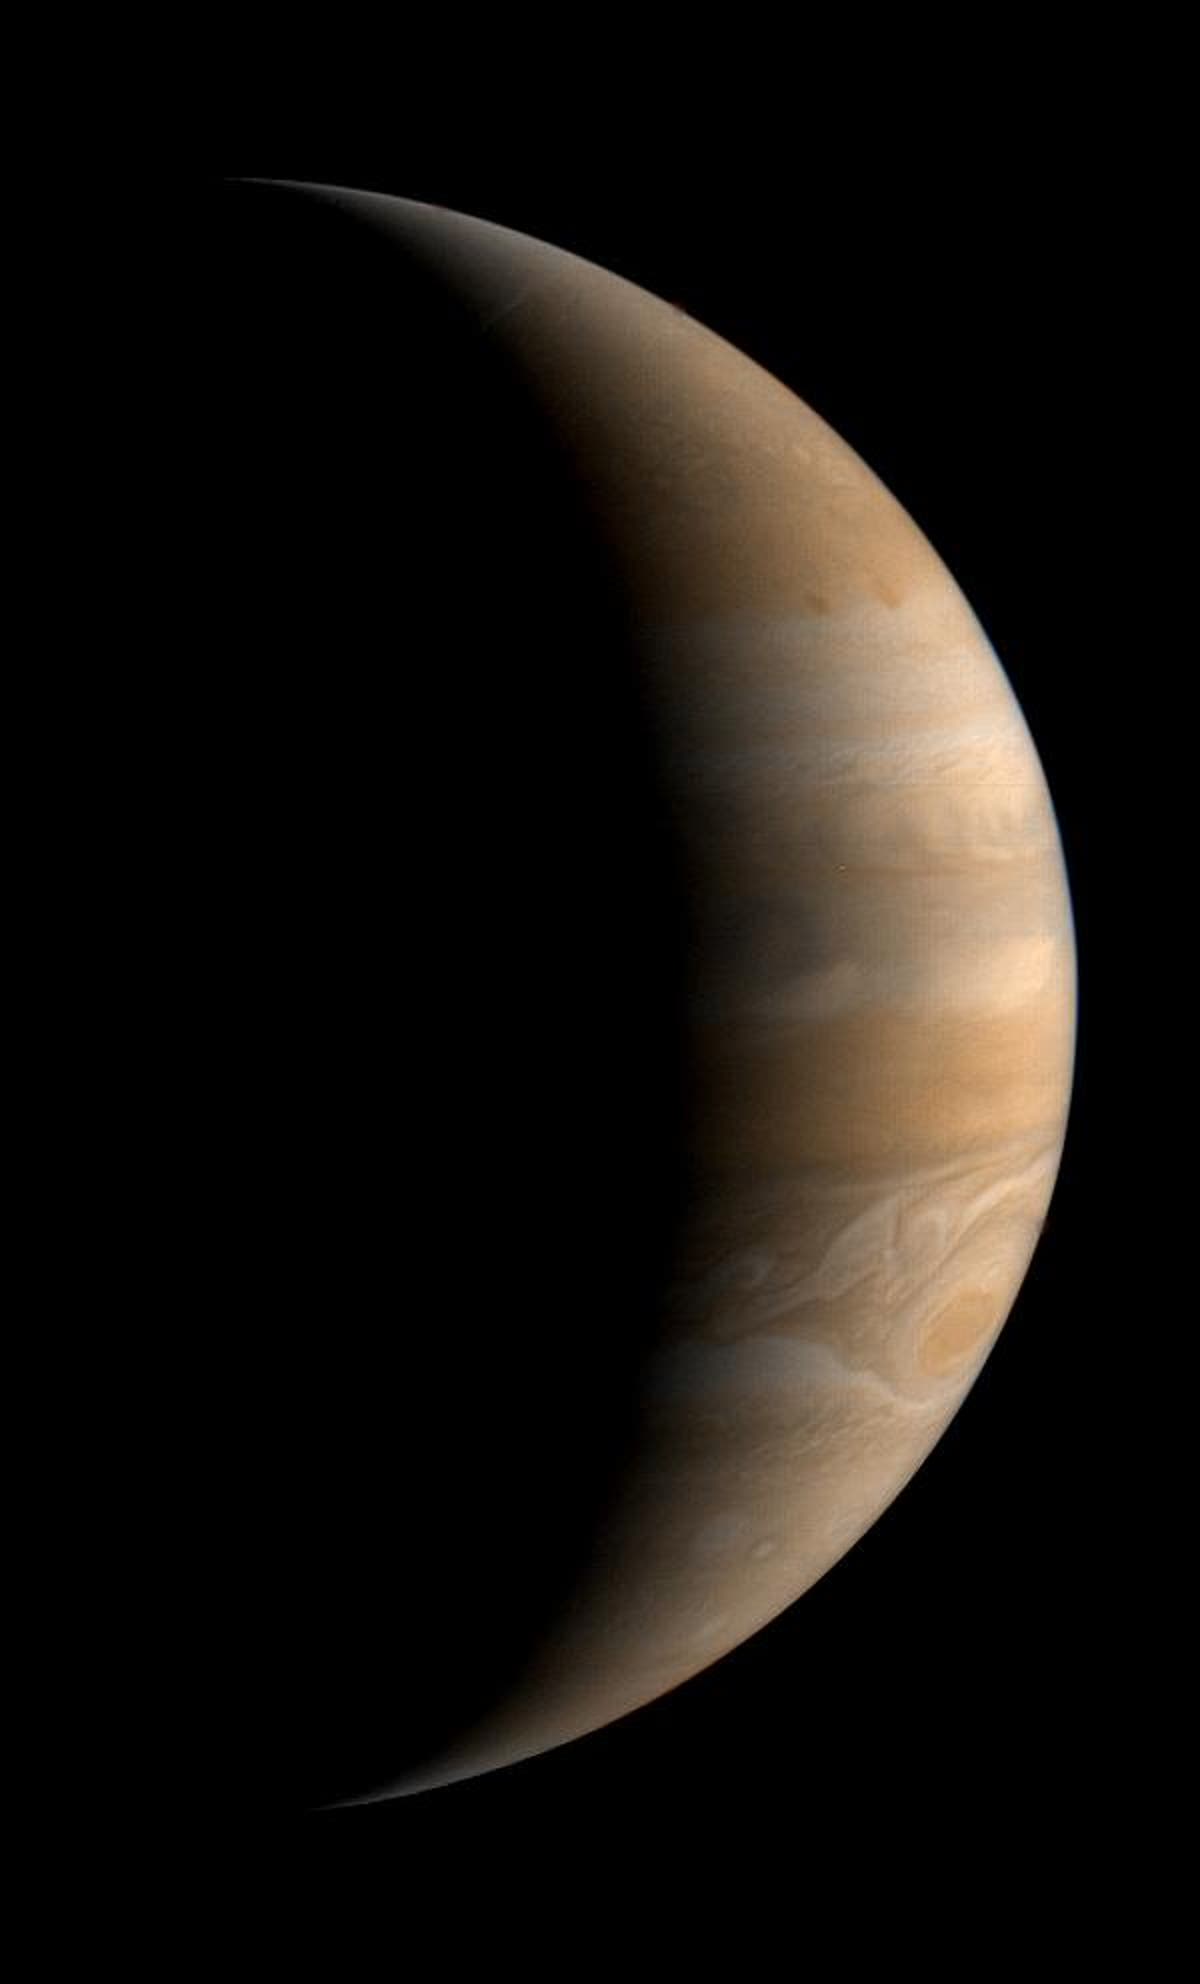 Jupiter may have grown large on a diet of infant planets